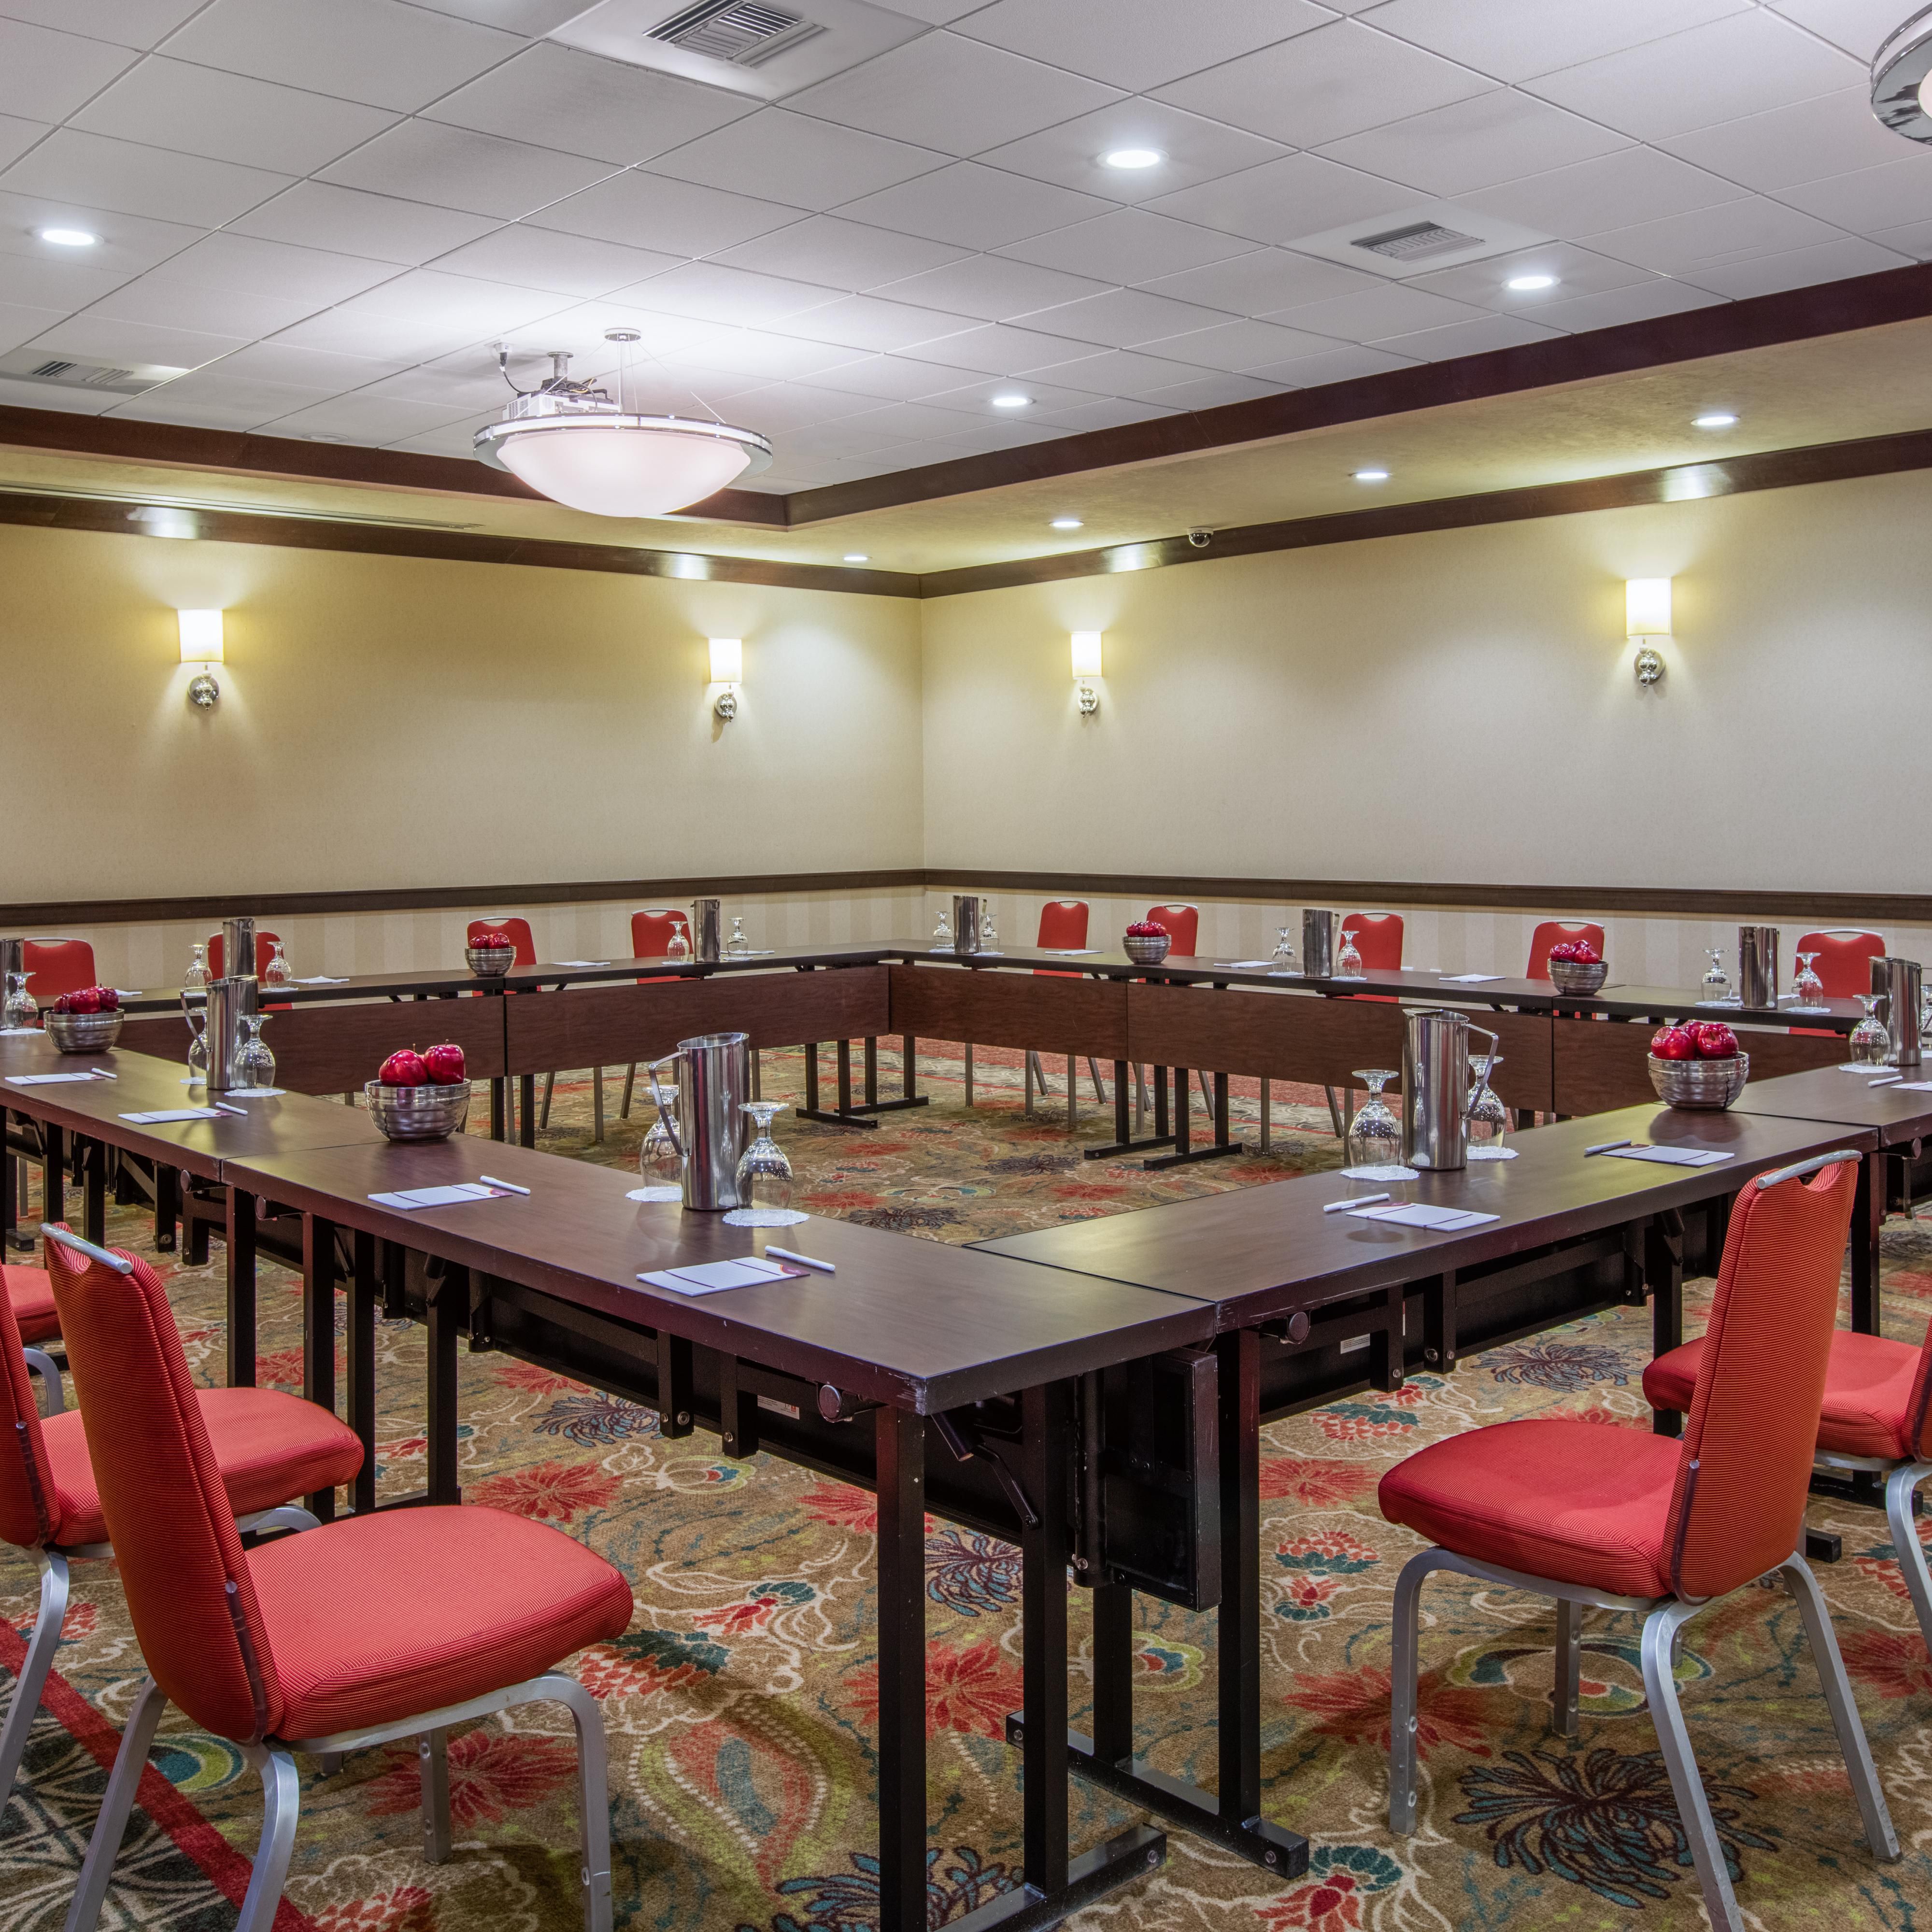 Our flexible meeting space is perfect for your business needs